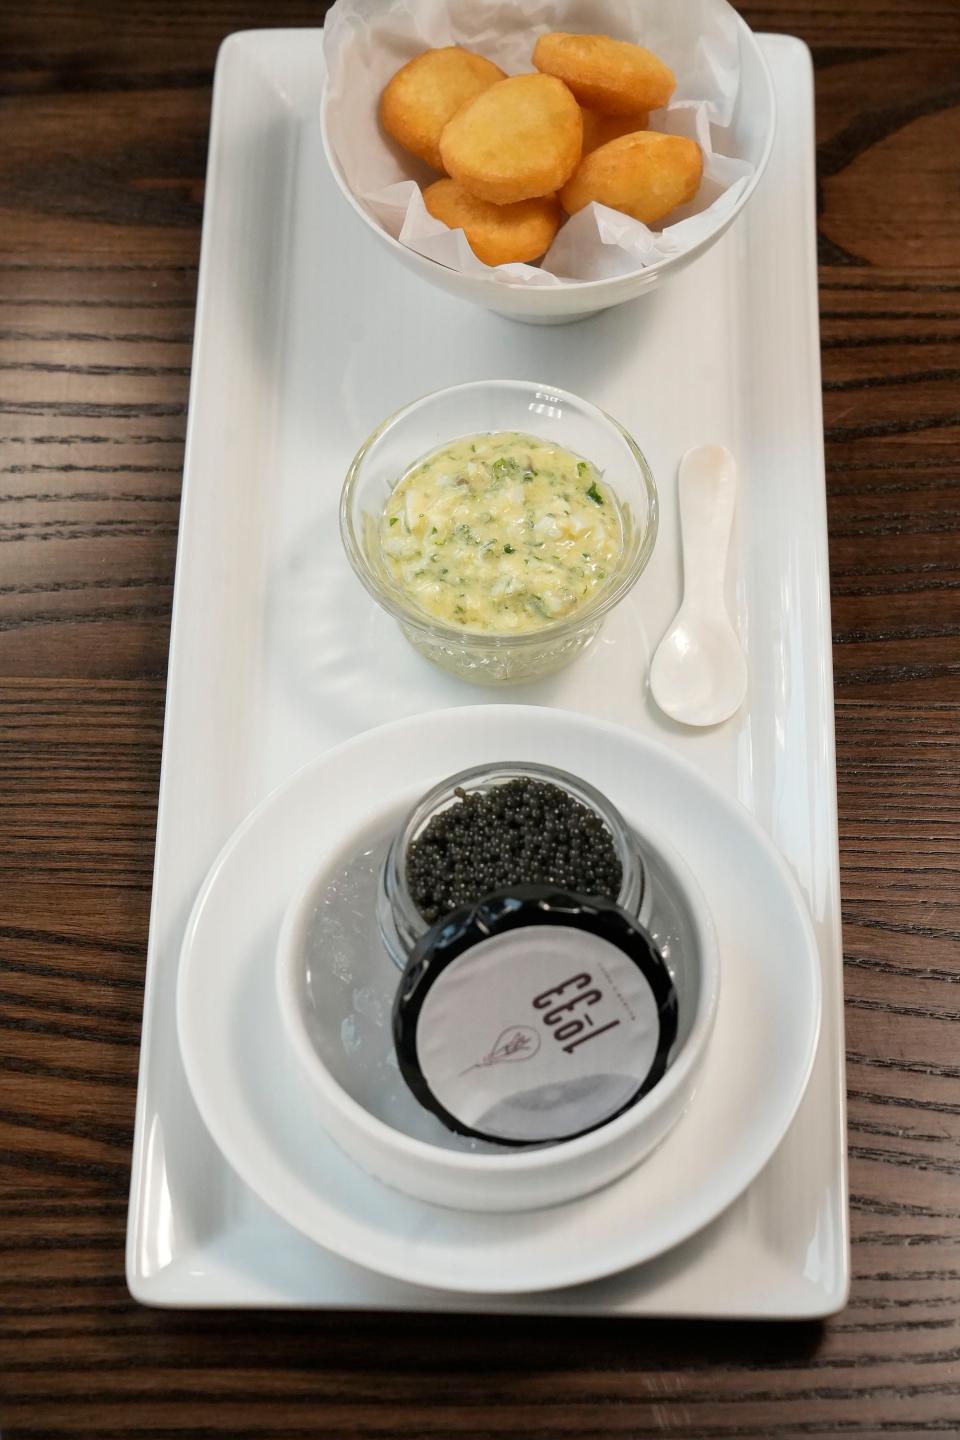 A standout on 1033's raw bar menu, the caviar is served with six bite-sized mochi doughnuts and a "special sauce."